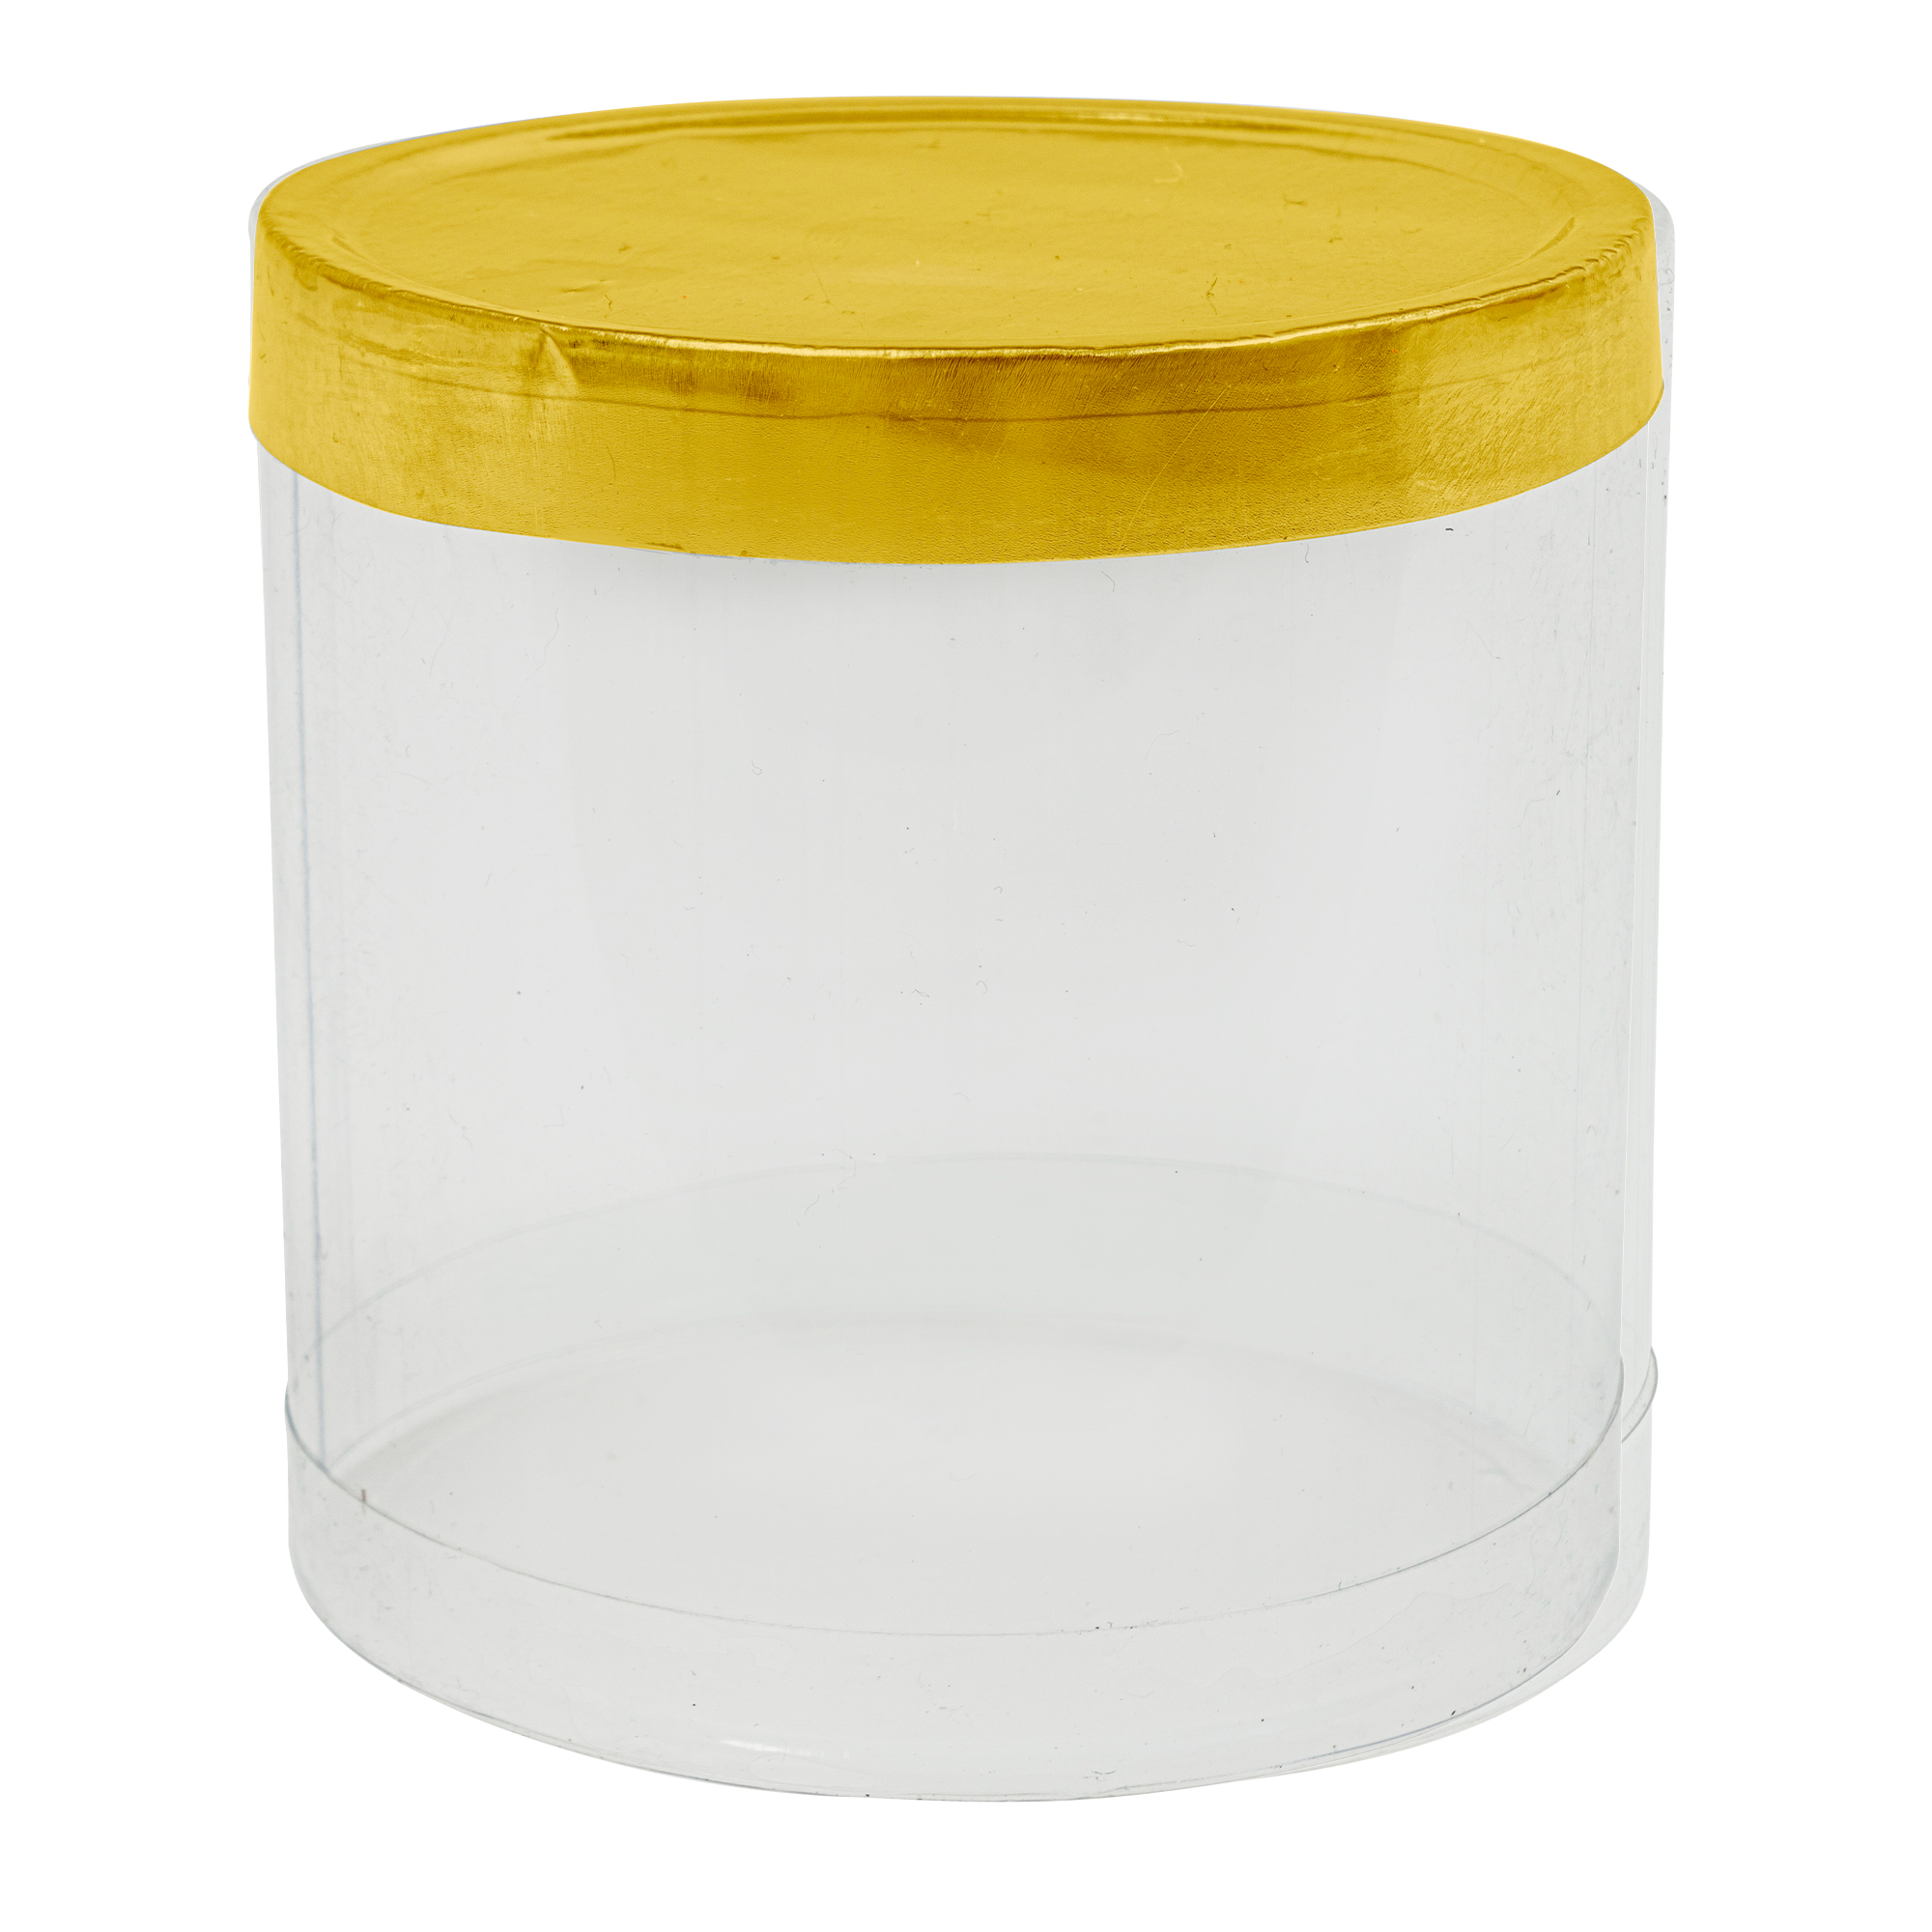 Cylinder PVC Container 4" 6pc/pack - Gold